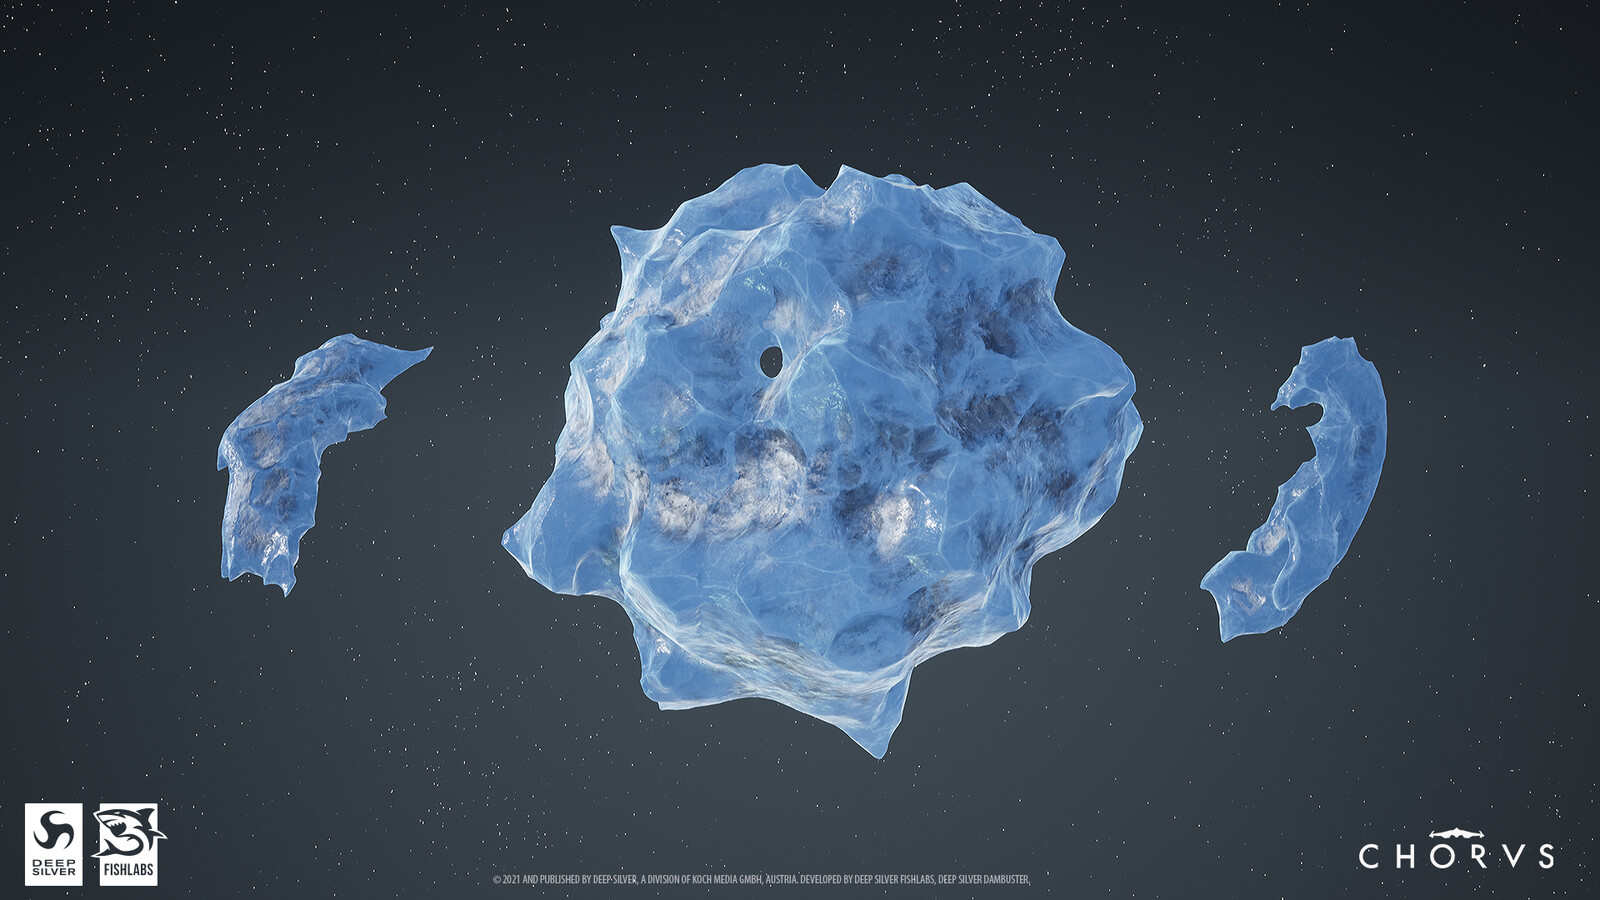 Special ice asteroids